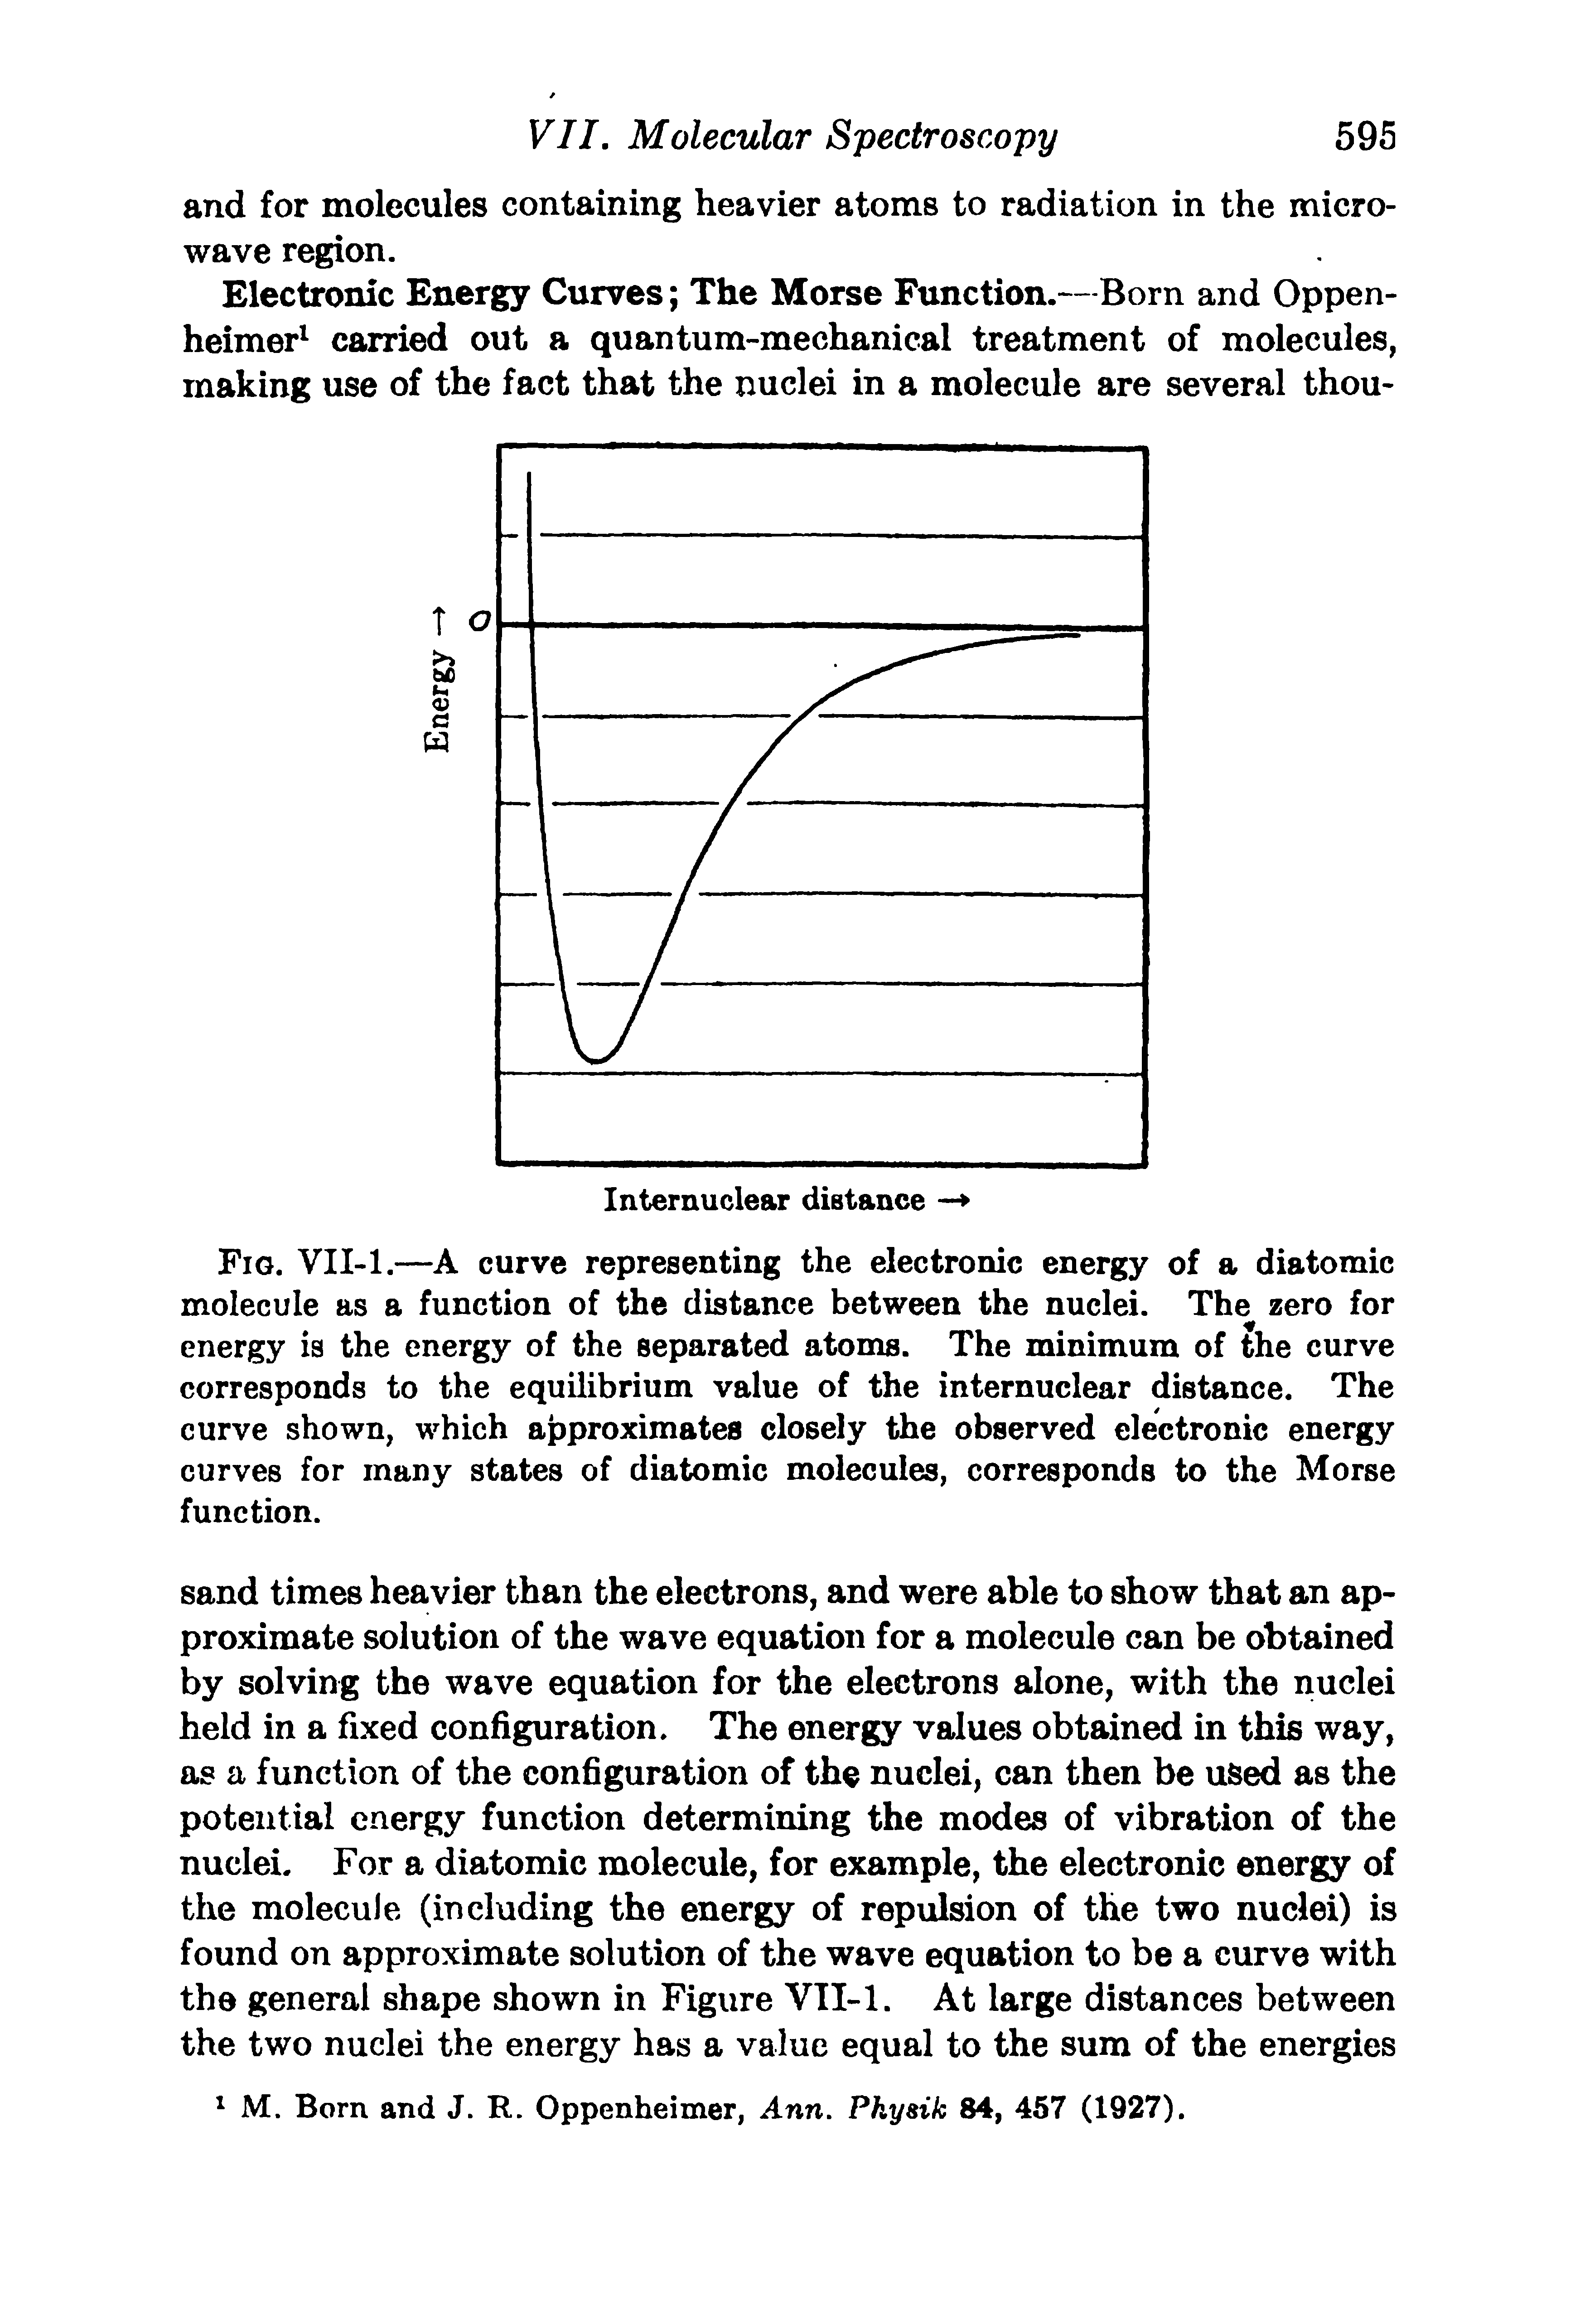 Fig. VII-1.—A curve representing the electronic energy of a diatomic molecule as a function of the distance between the nuclei. The zero for energy is the energy of the separated atoms. The minimum of the curve corresponds to the equilibrium value of the internuclear distance. The curve shown, which approximates closely the observed electronic energy curves for many states of diatomic molecules, corresponds to the Morse function.